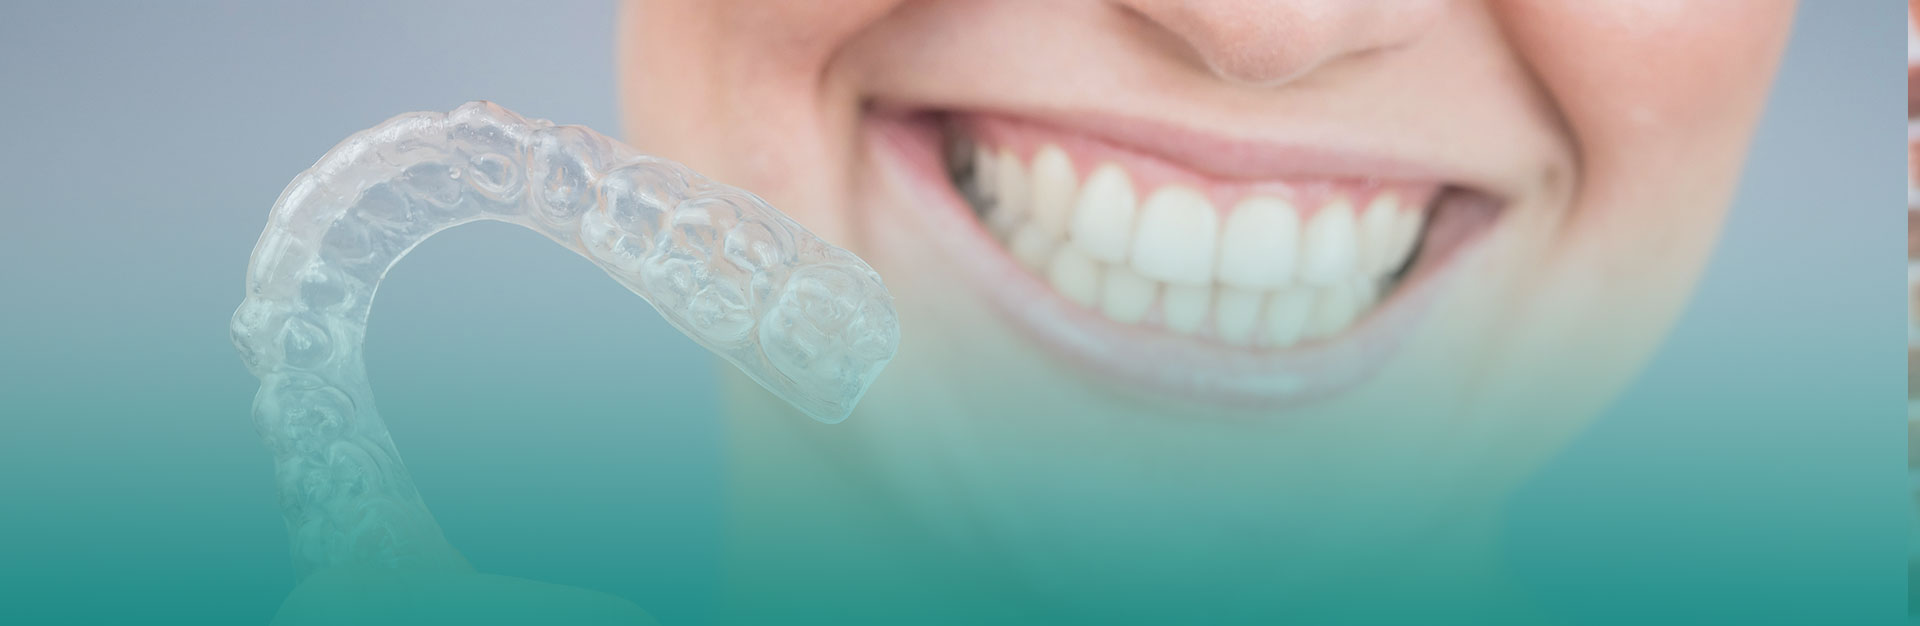 A woman is holding a Invisalign braces